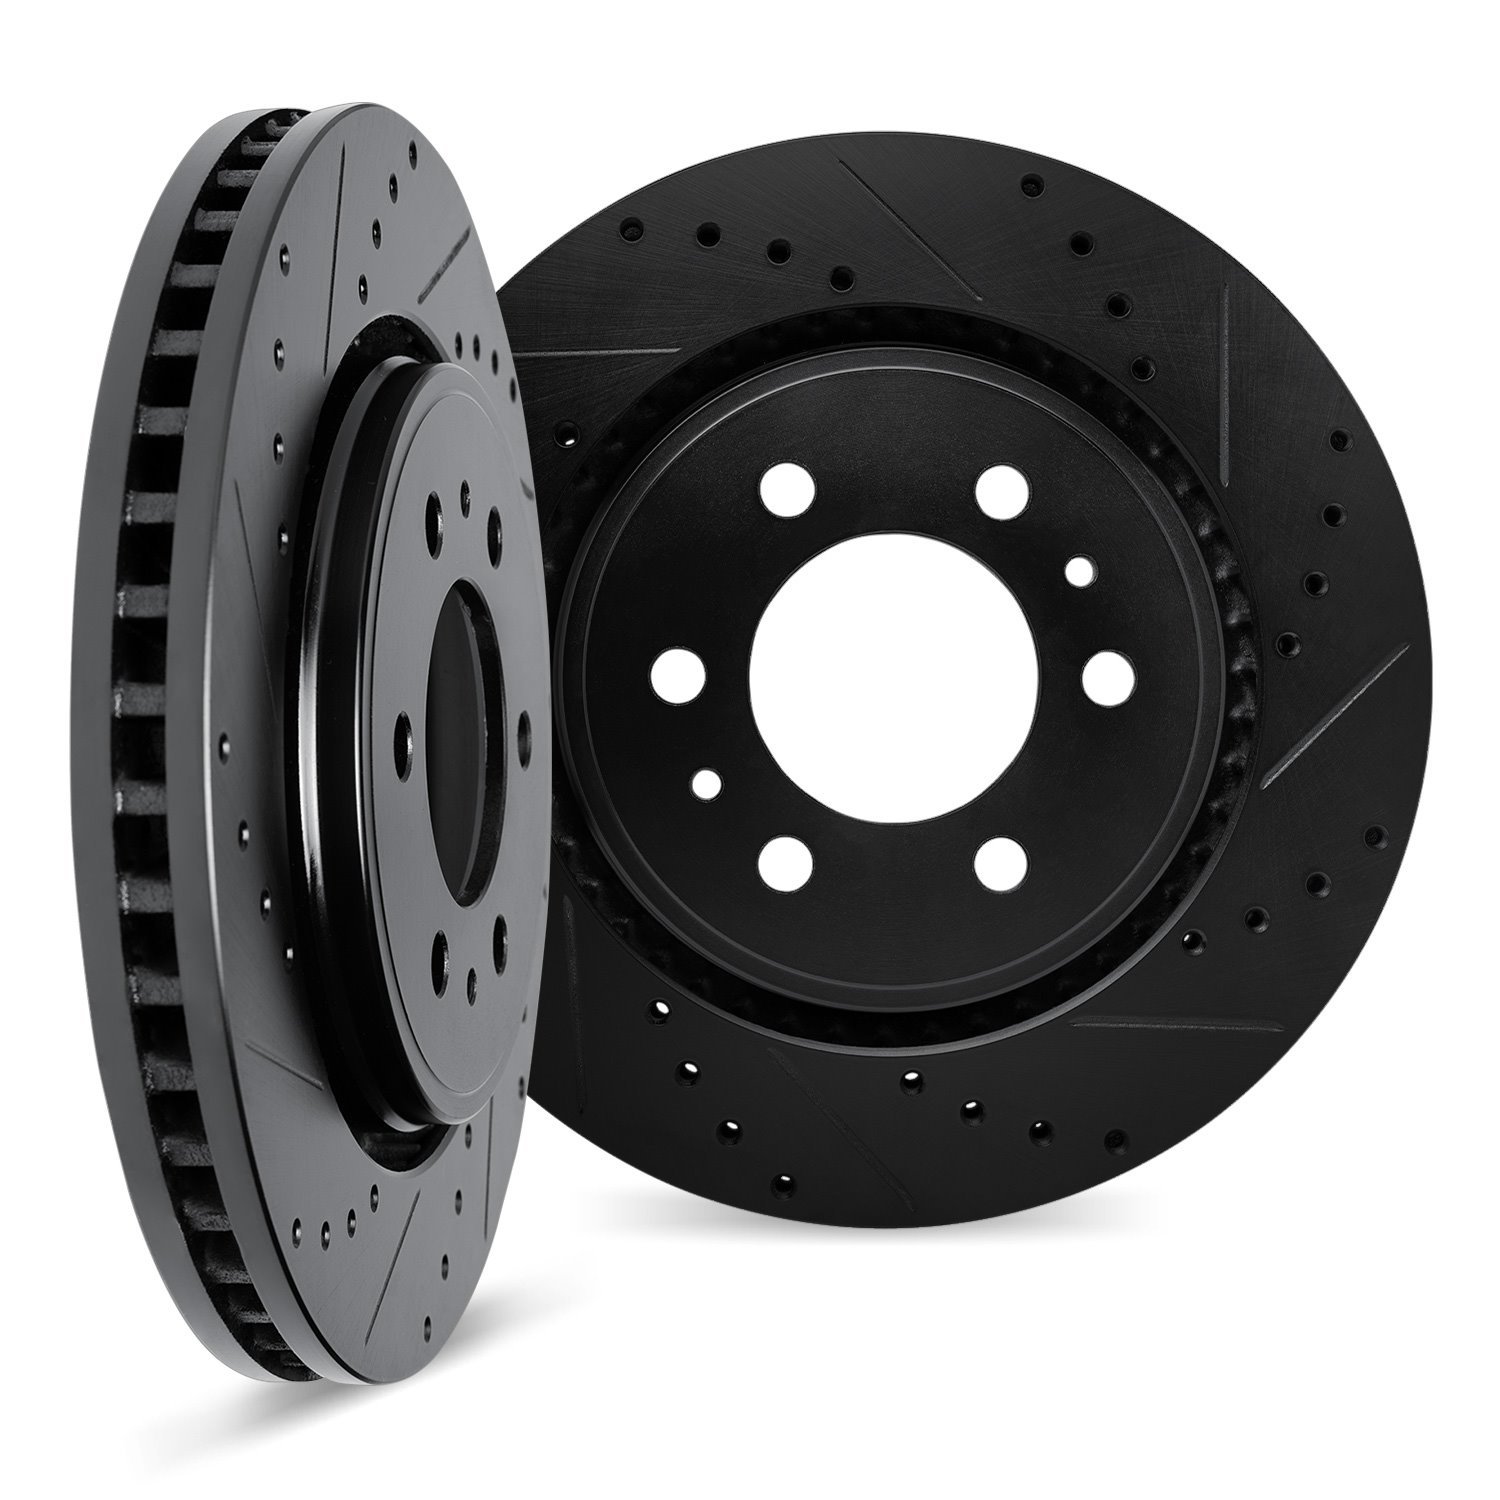 8002-76025 Drilled/Slotted Brake Rotors [Black], 1986-1995 Lexus/Toyota/Scion, Position: Front